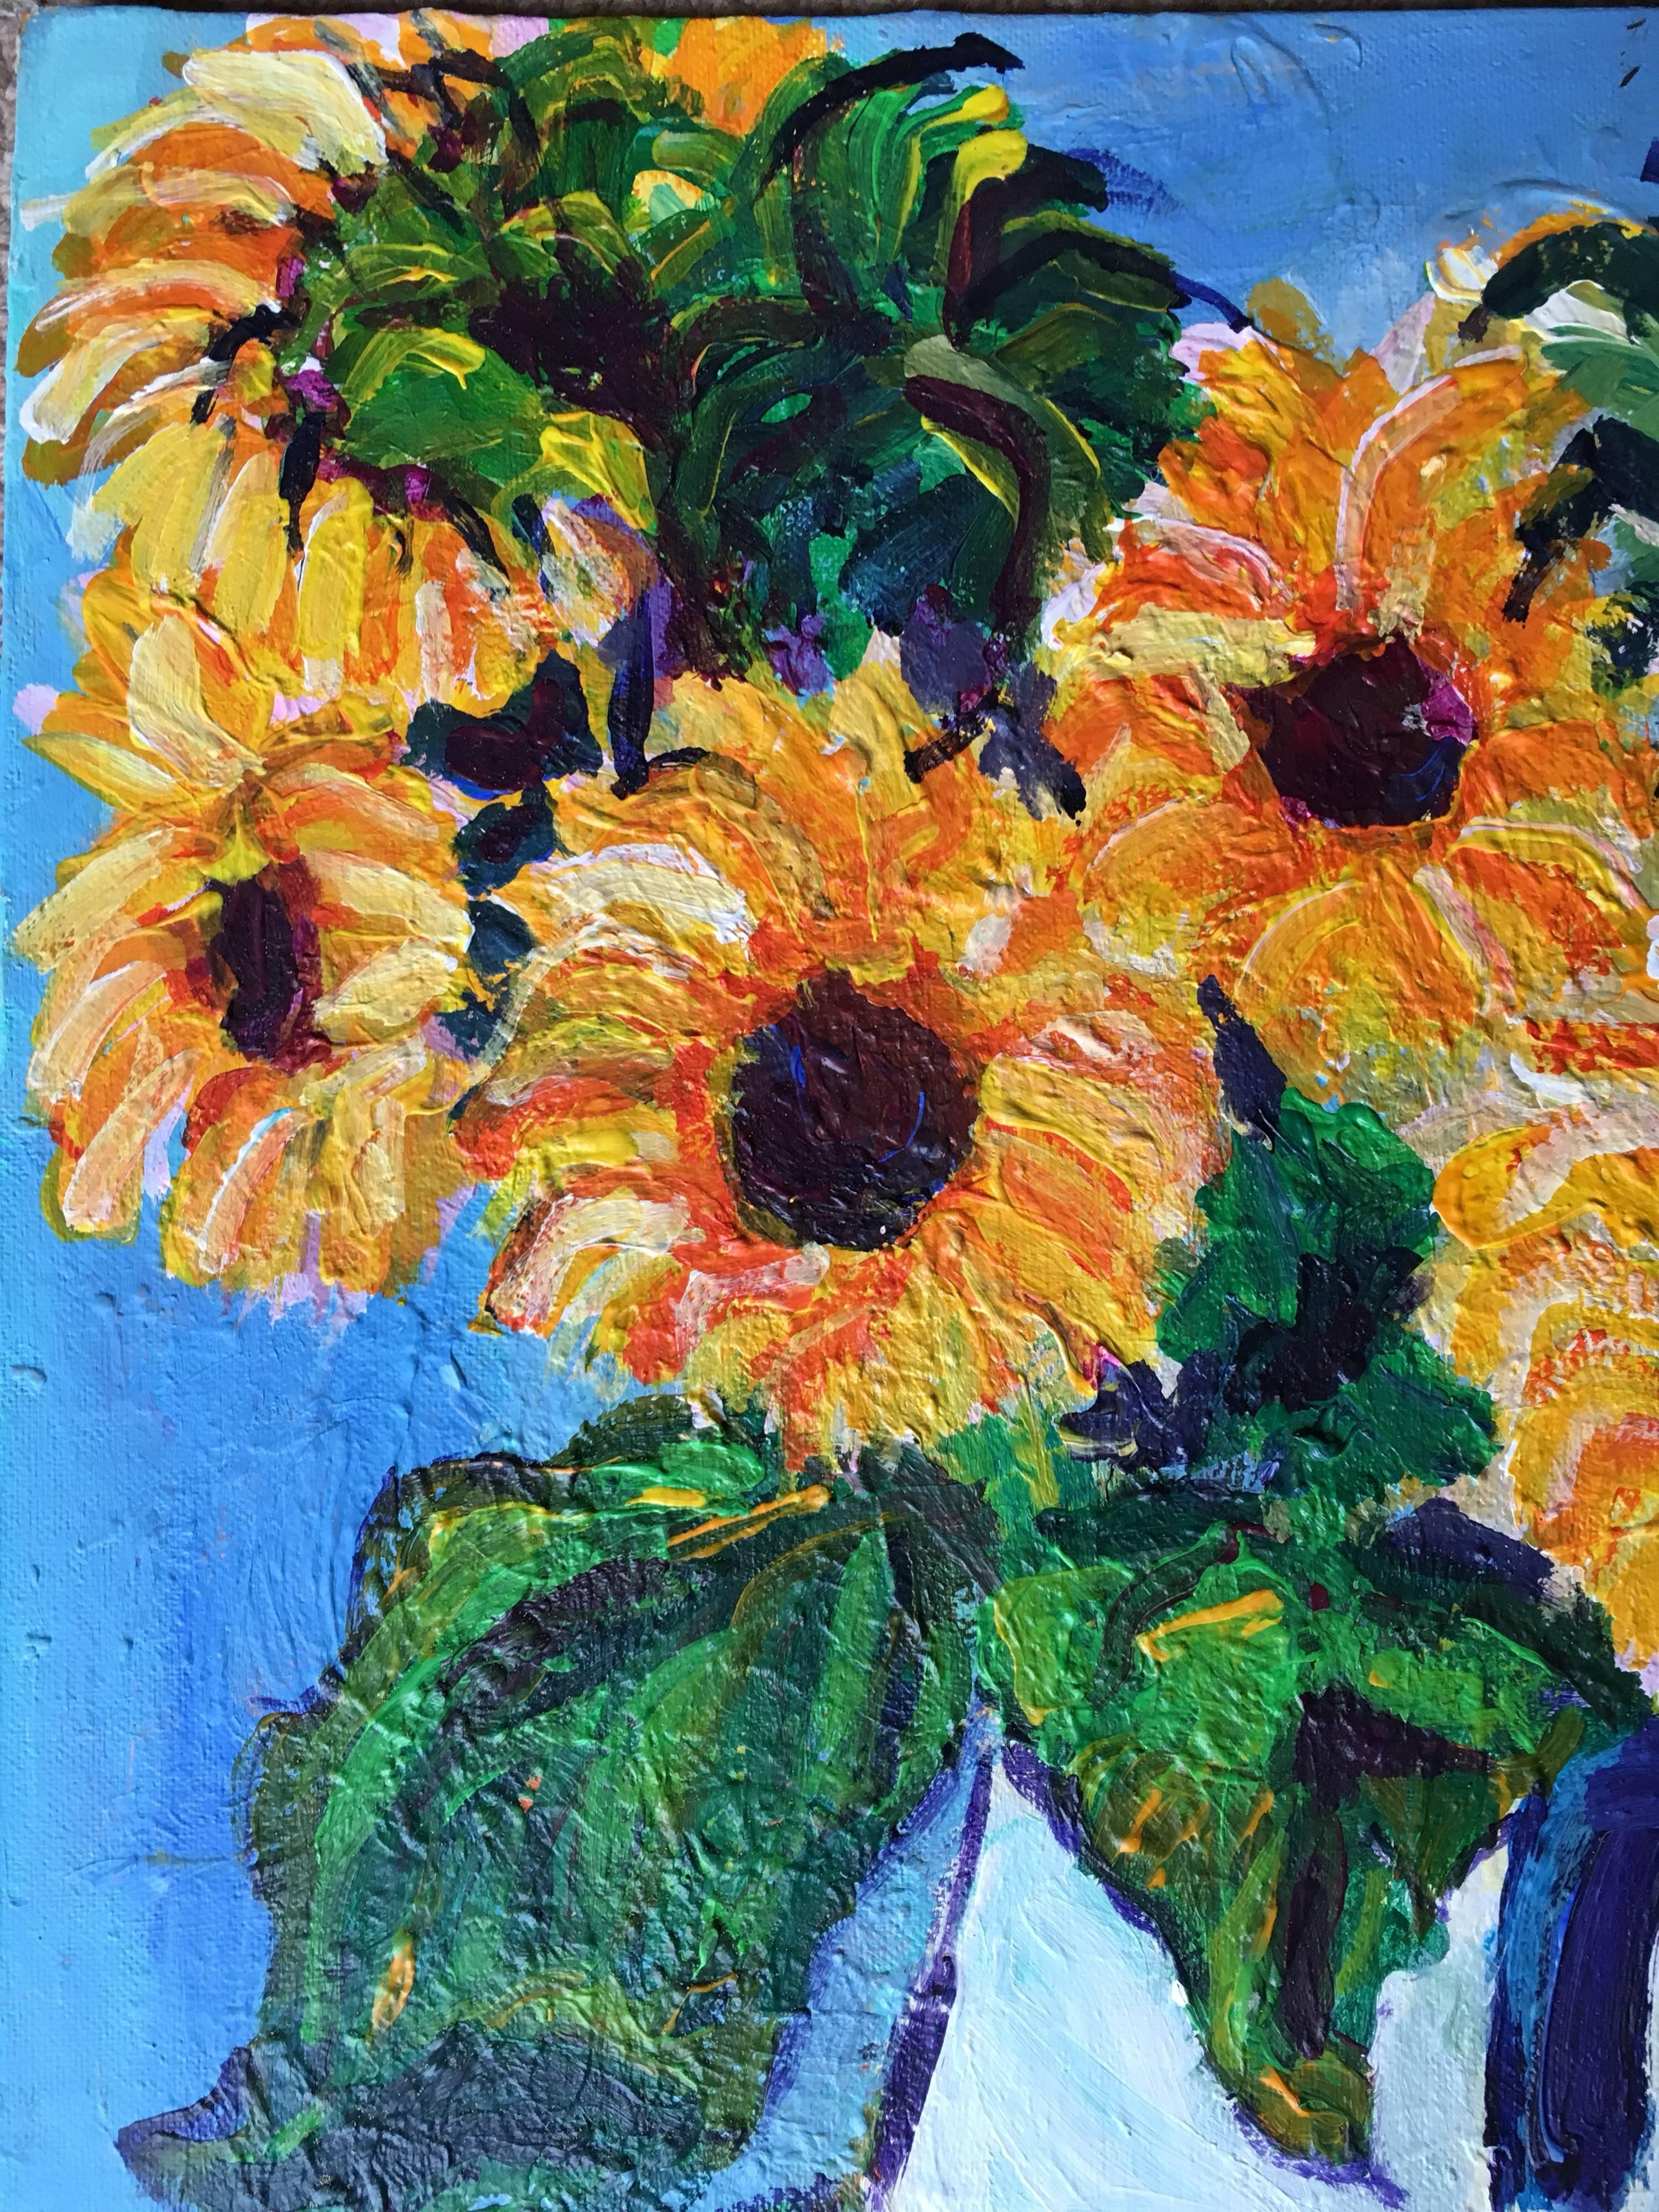 Sunflowers in Jug
Impressionist Oil Painting, Still Life
by Pamela Cawley, British 20th century
oil painting on board, unframed
board: 20 x 16 inches 

Stunning original Impressionist oil painting by the 20th century British artist, Pamela Cawley.